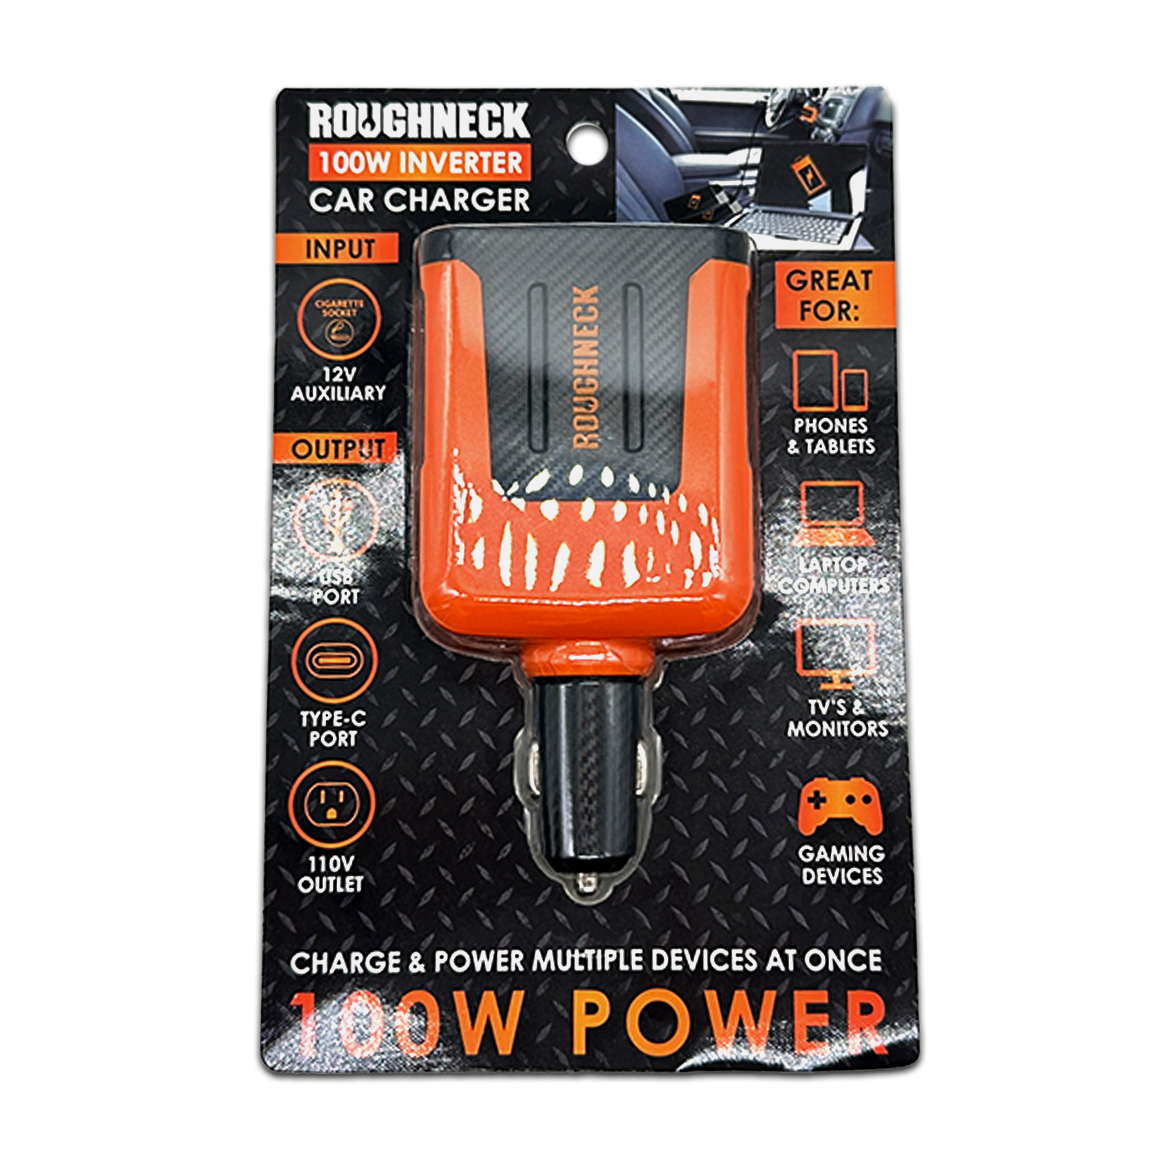 ITEM NUMBER 023861L ROUGHNECK DC CHARGER CONVERTER - STORE SURPLUS NO DISPLAY - 4 PIECES PER PACK